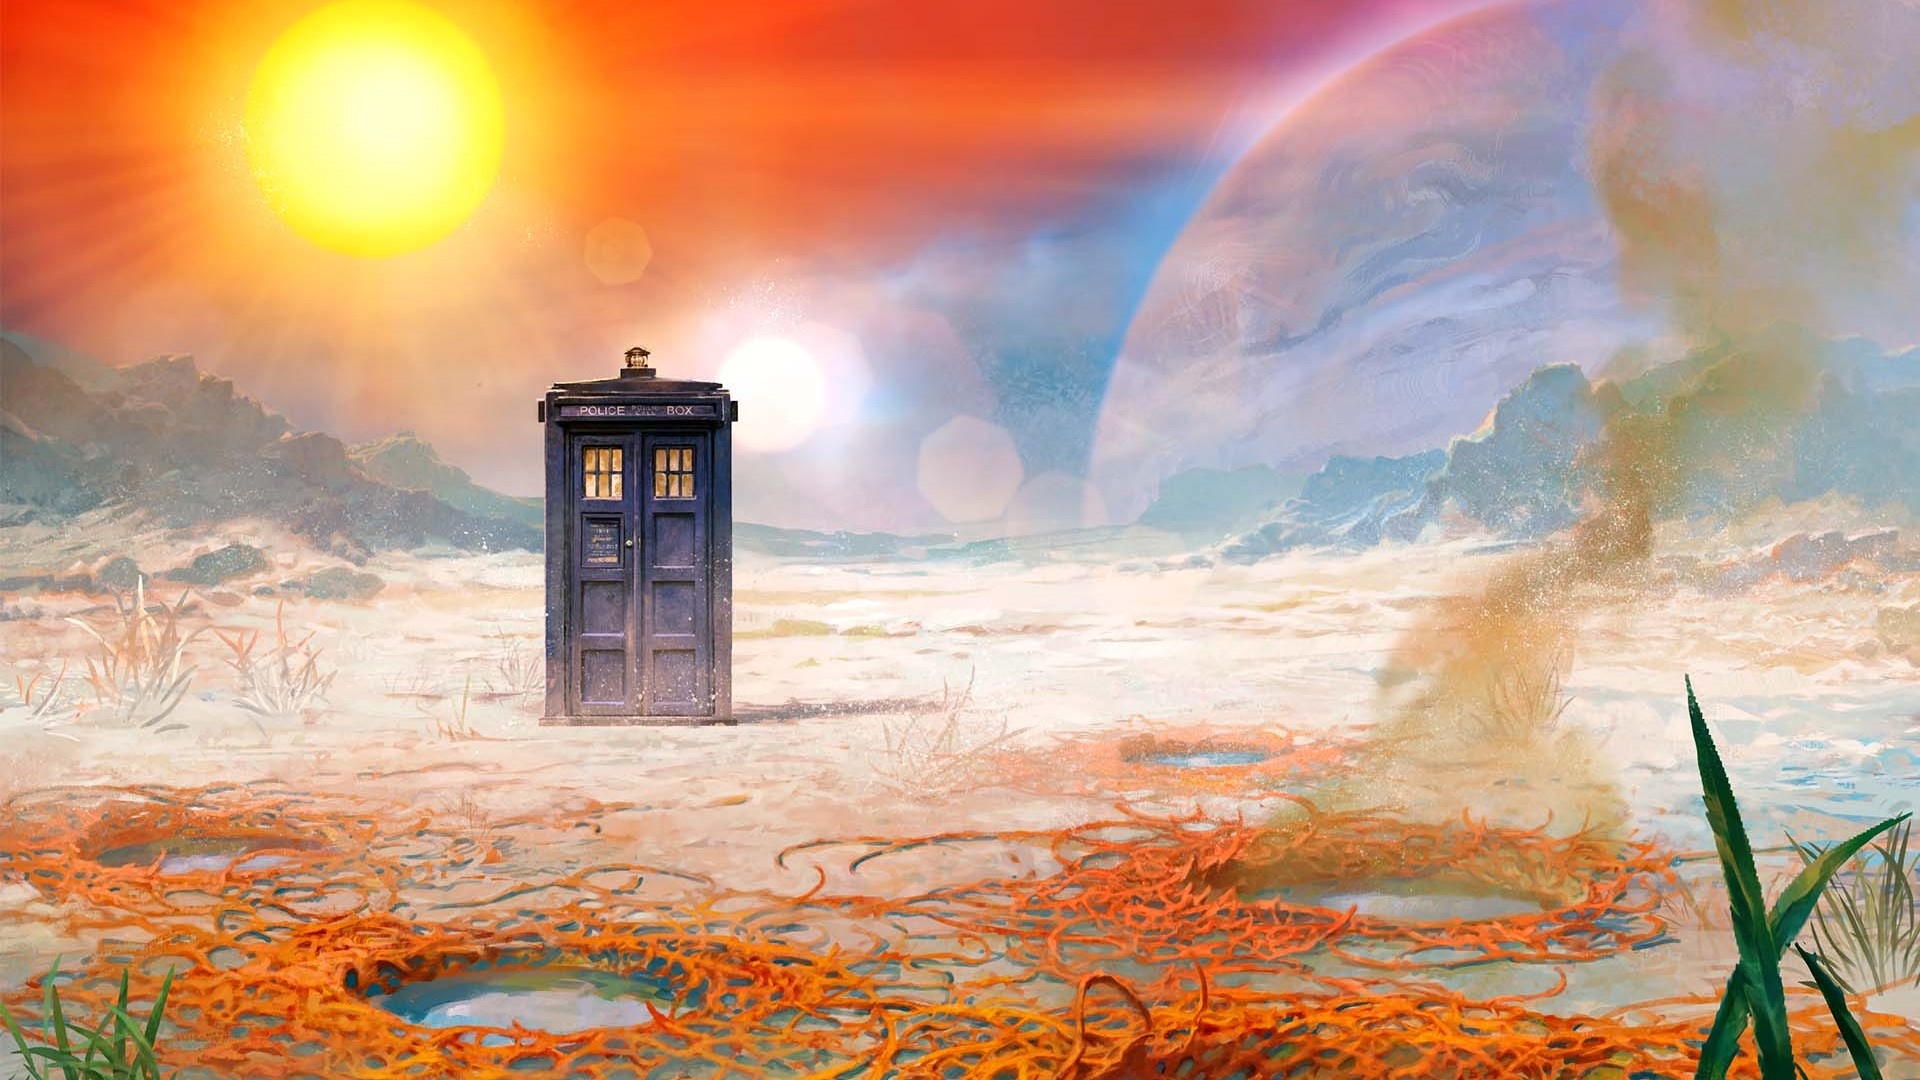 MTG doctor who release date - the tardis on an alien world